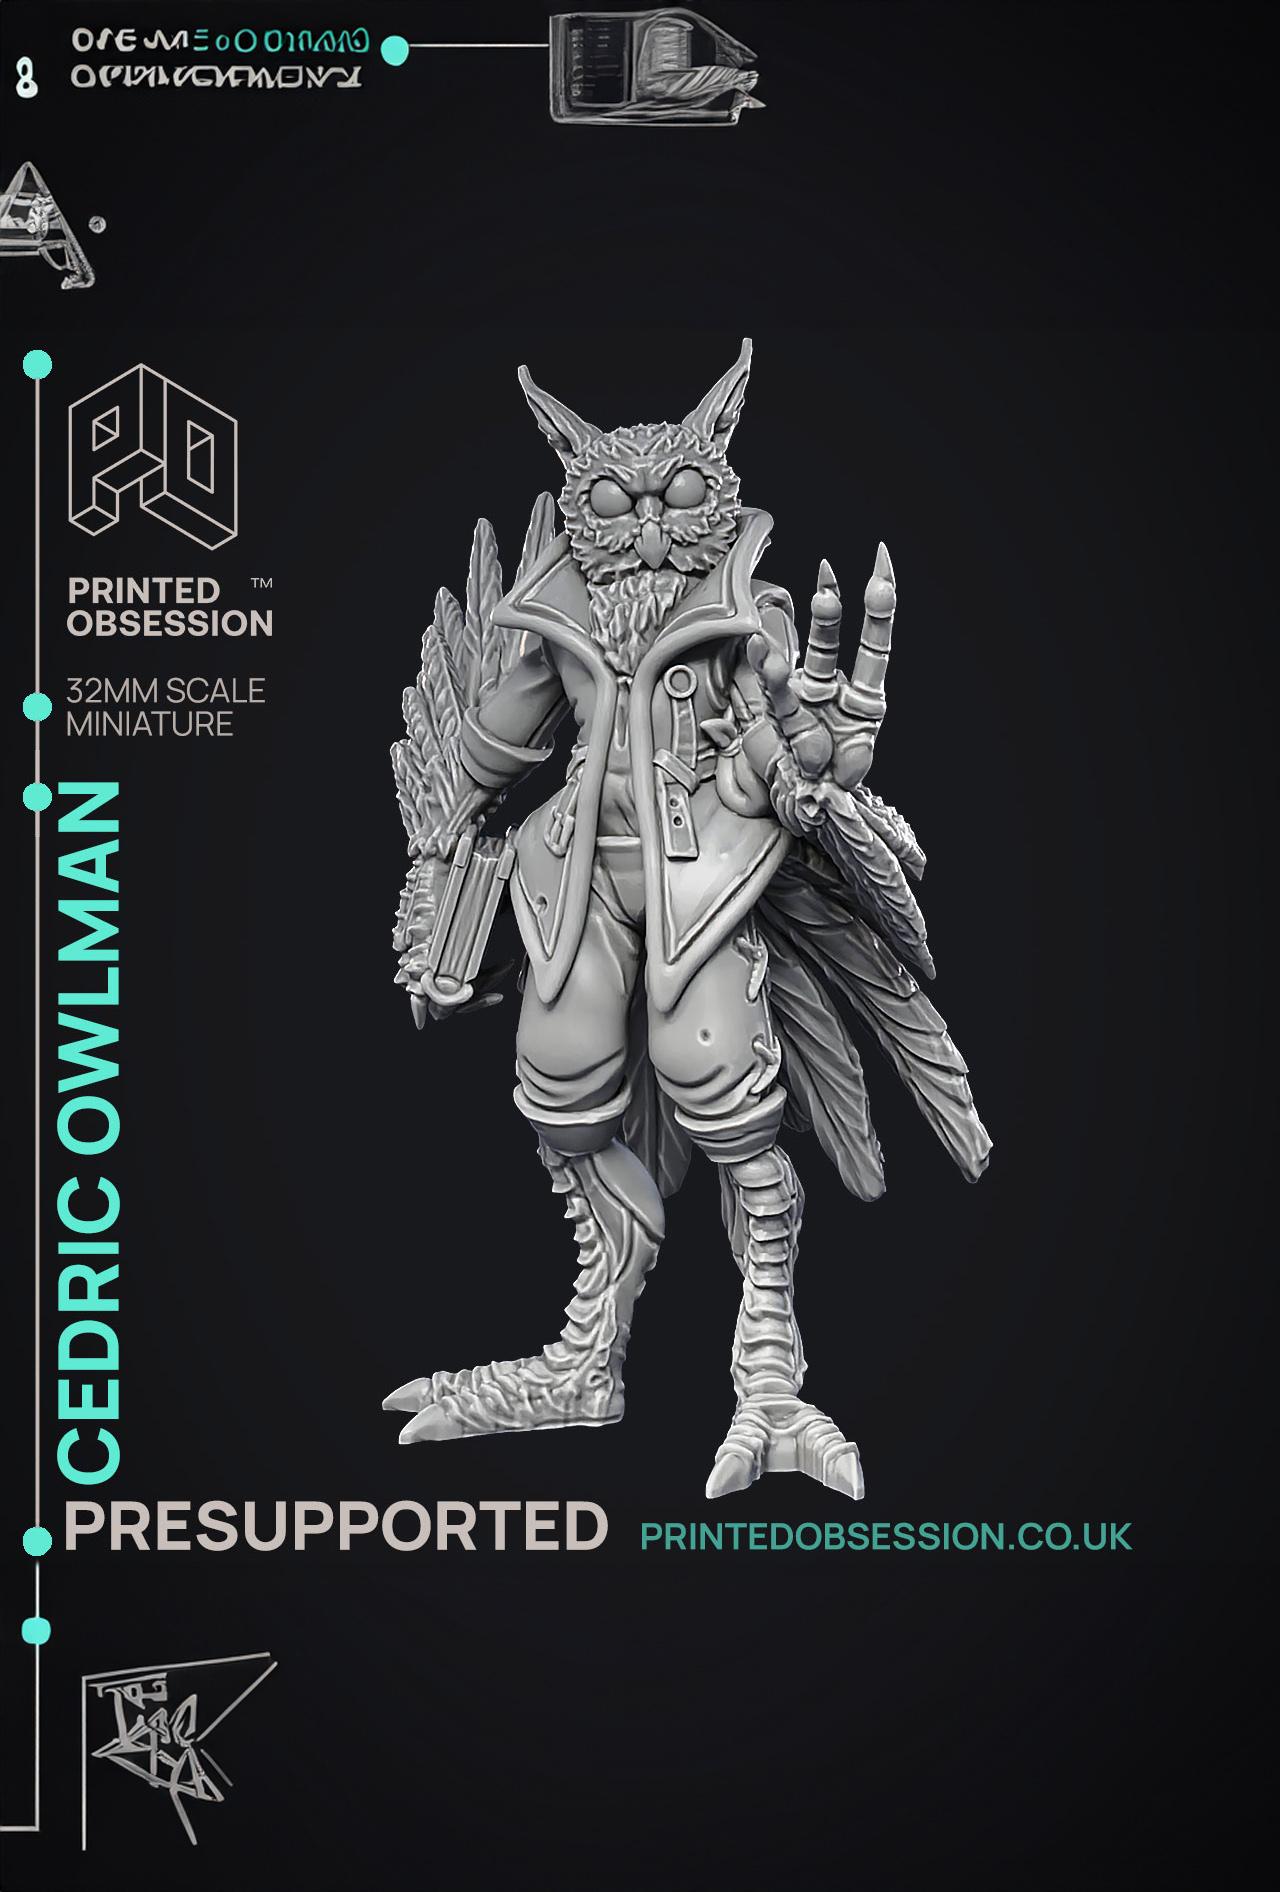 Owlman - Frindly NPC - Cryptids of the Darkwoods - PRESUPPORTED - Illustrated and Stats - 32mm scale 3d model